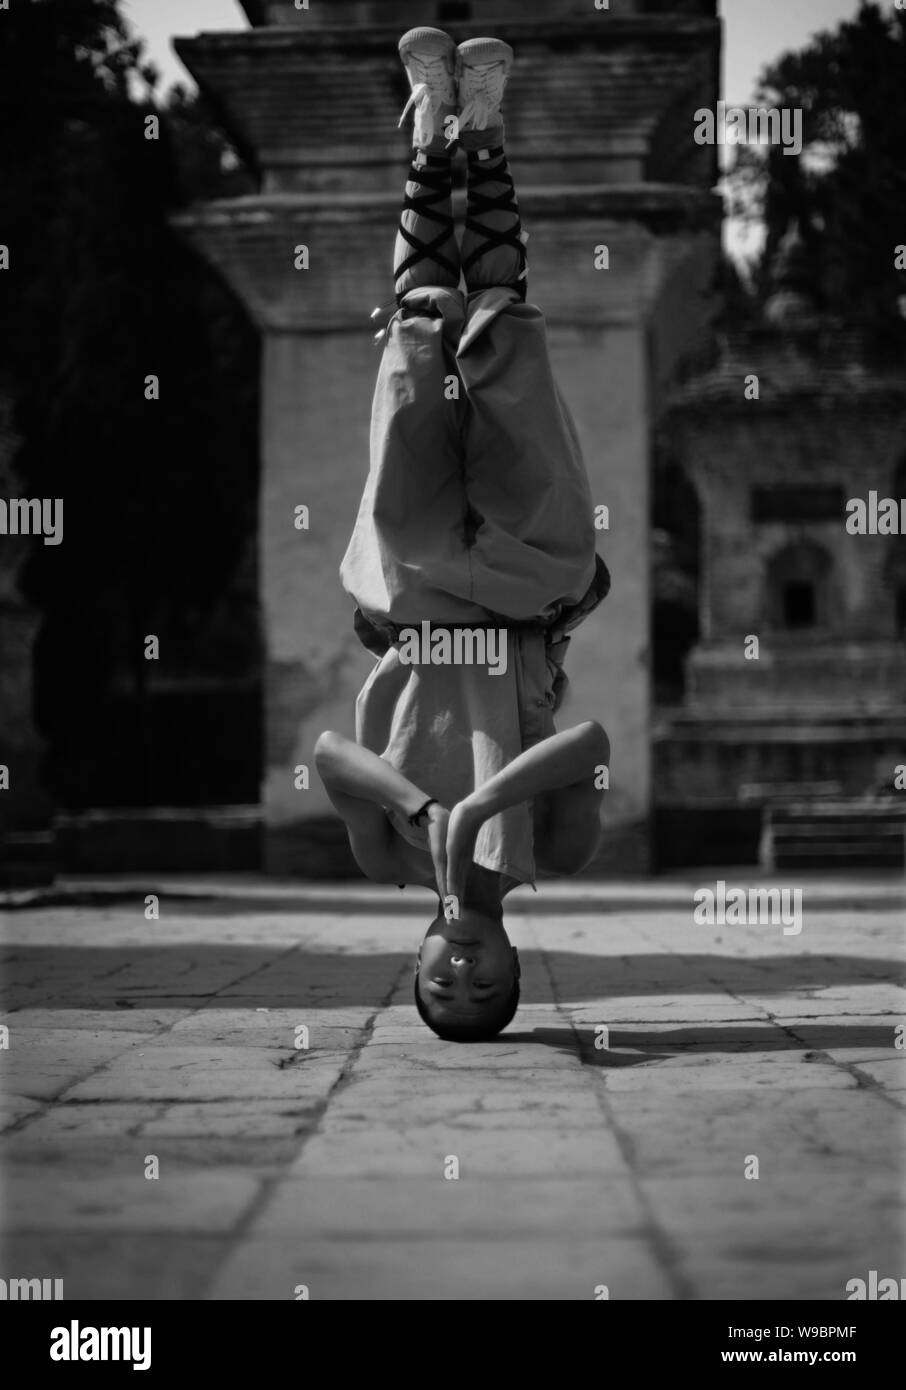 A young Shaolin monk performs headstand while practising kungfu at the Shaolin Temple in Dengfeng city, central Chinas Henan province, 15 August 2009. Stock Photo